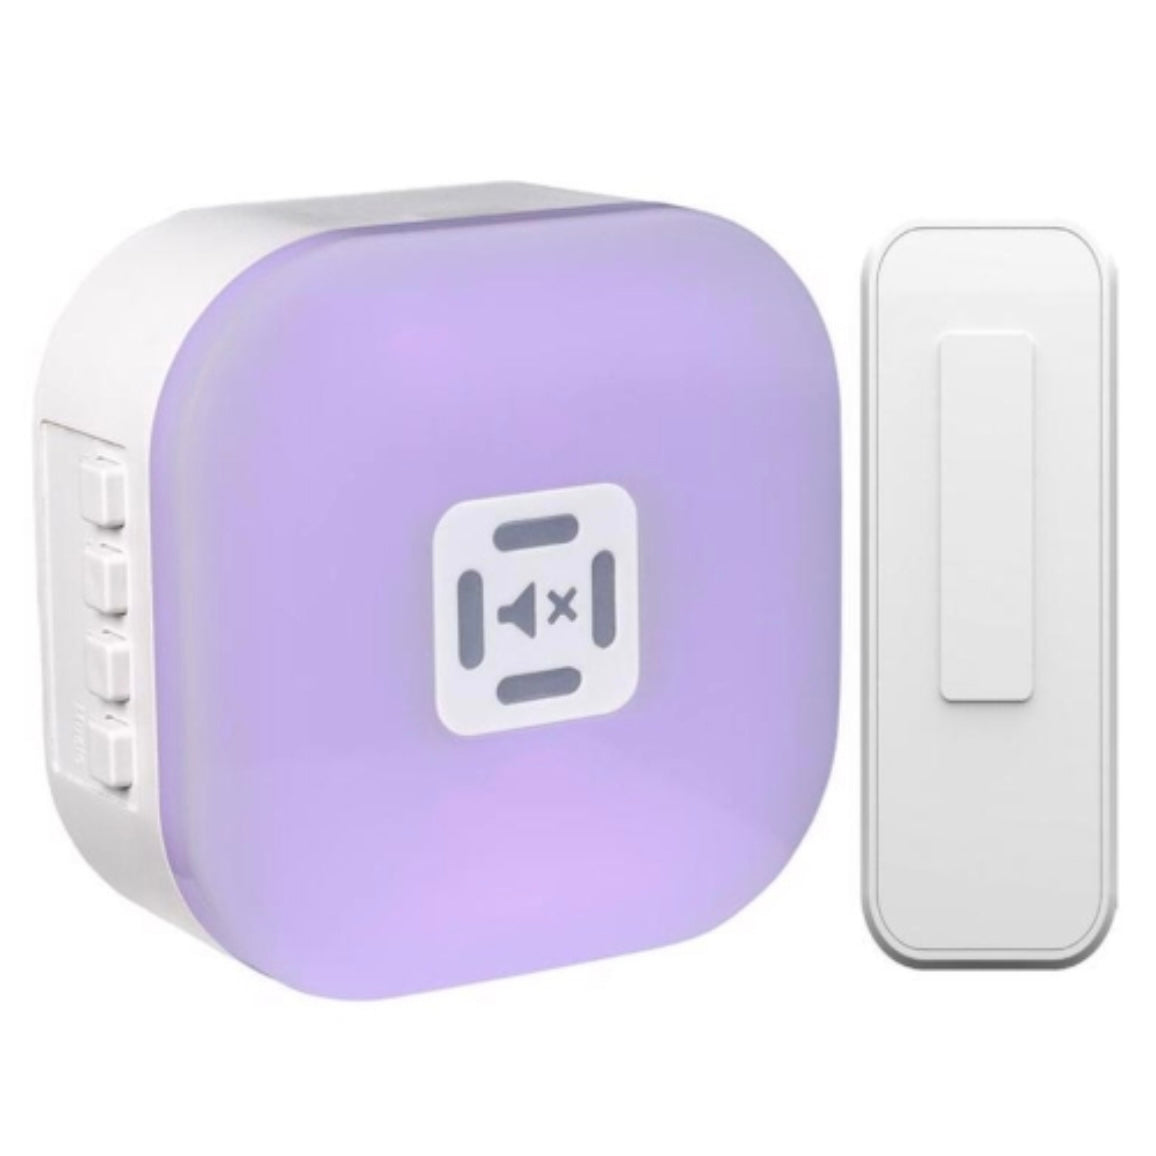 Wireless Doorbell Chime by Heath Zenith - 7 LED Indicators